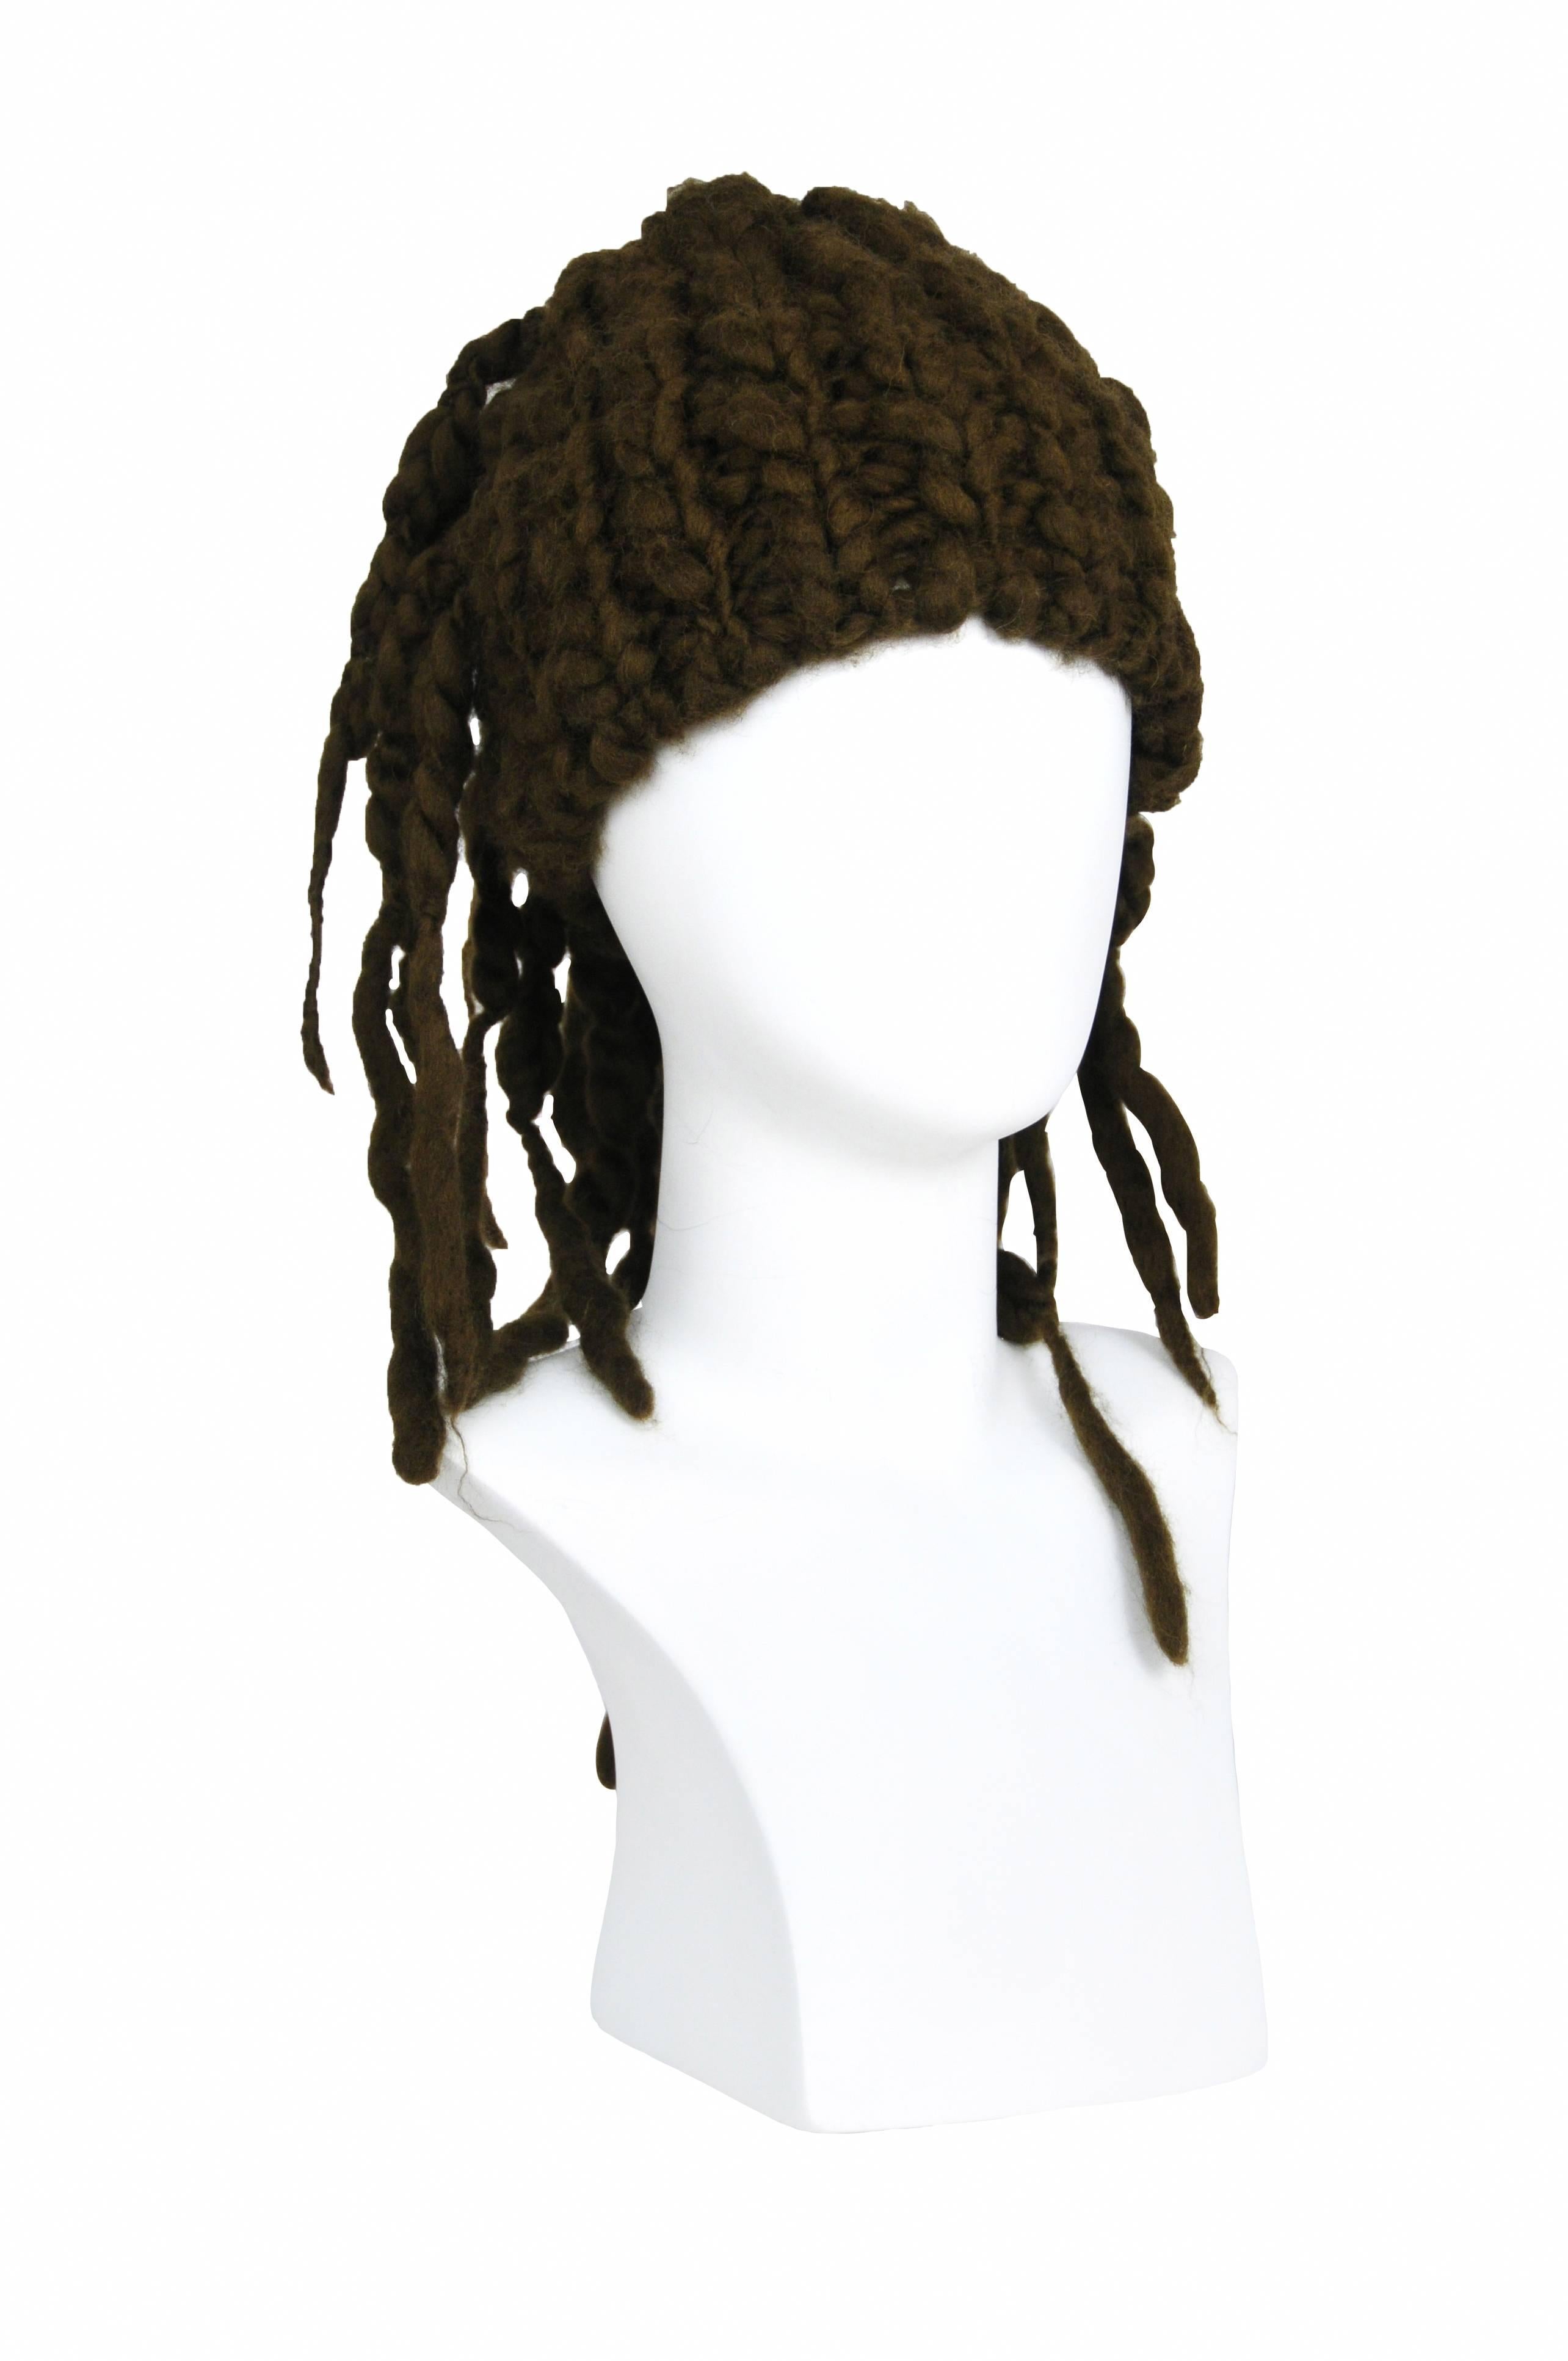 Vintage brown knit hat with dread lock style strands.
Please inquire for additional images.